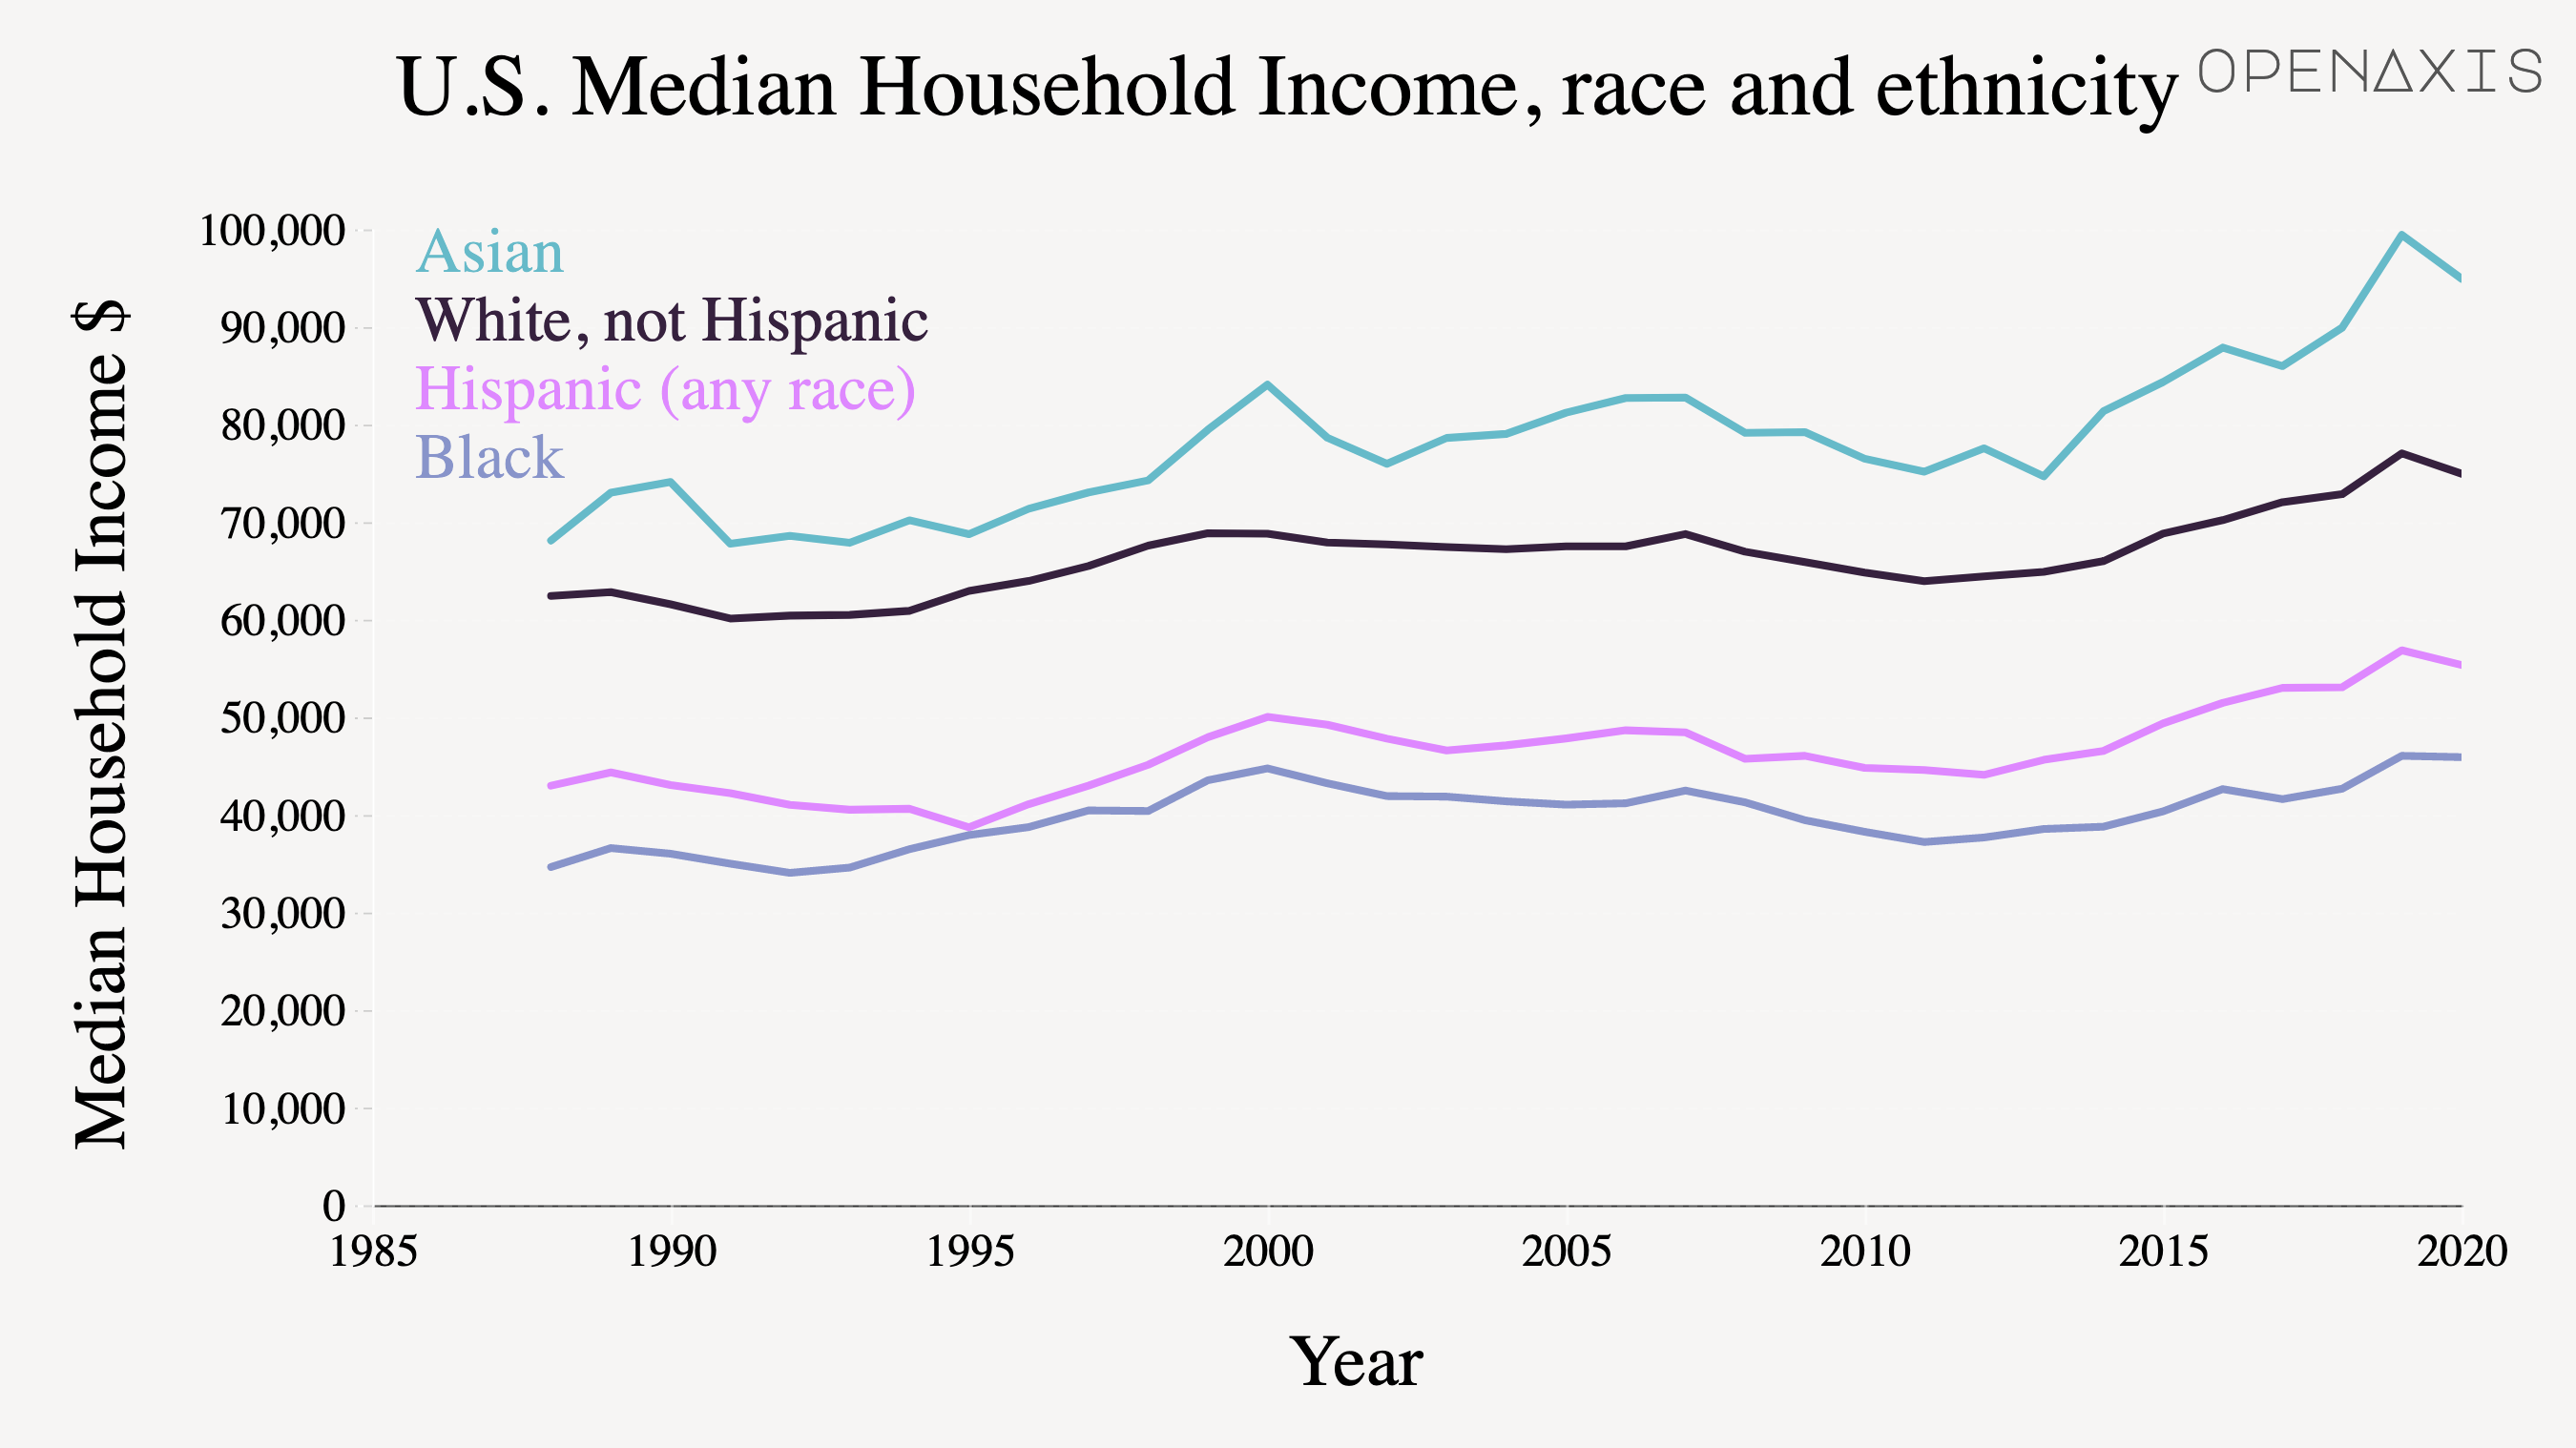 <p>In 2020, Black households had the lowest median household income of $45,870. In comparison, White households had a median household income of $74,912. </p><p><br /></p><p>Source: <a href="https://www.census.gov/library/publications/2021/demo/p60-273.html" target="_blank">U.S. Census Bureau, Current Population Survey, 1968 to 2021 Annual Social and Economic Supplements (CPS ASEC).</a></p>